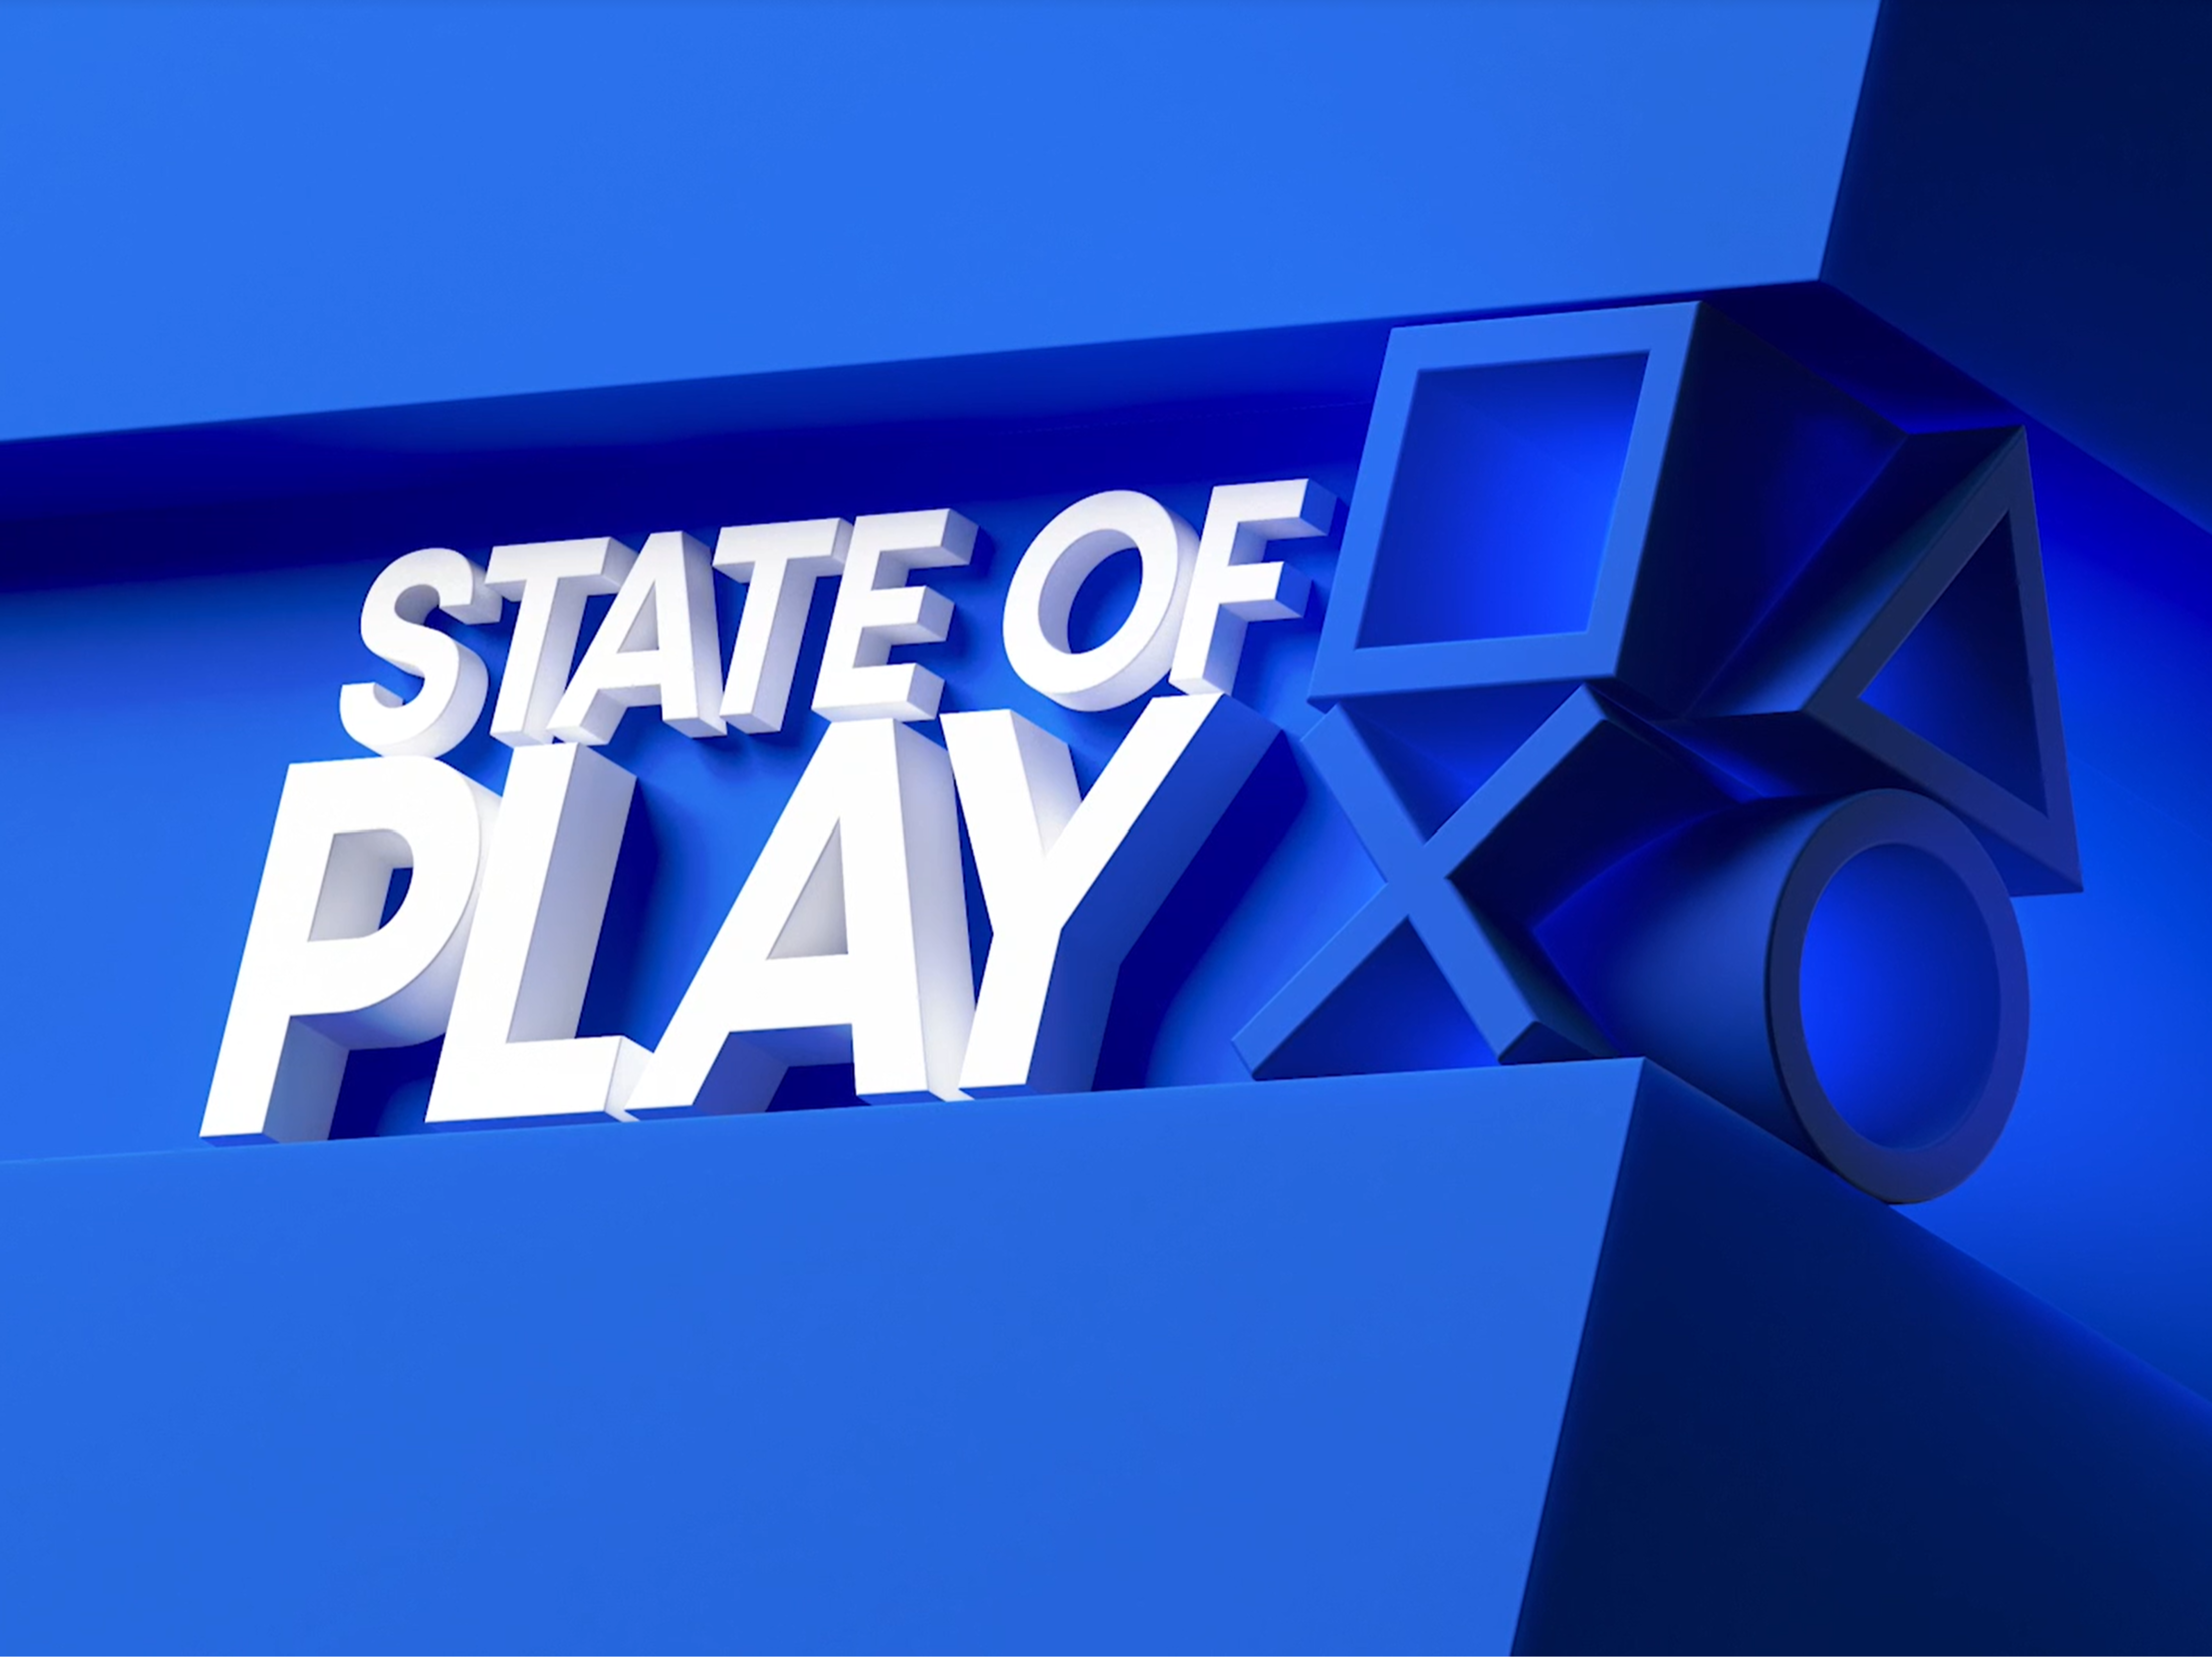 Watch PlayStation State of Play event game videos here